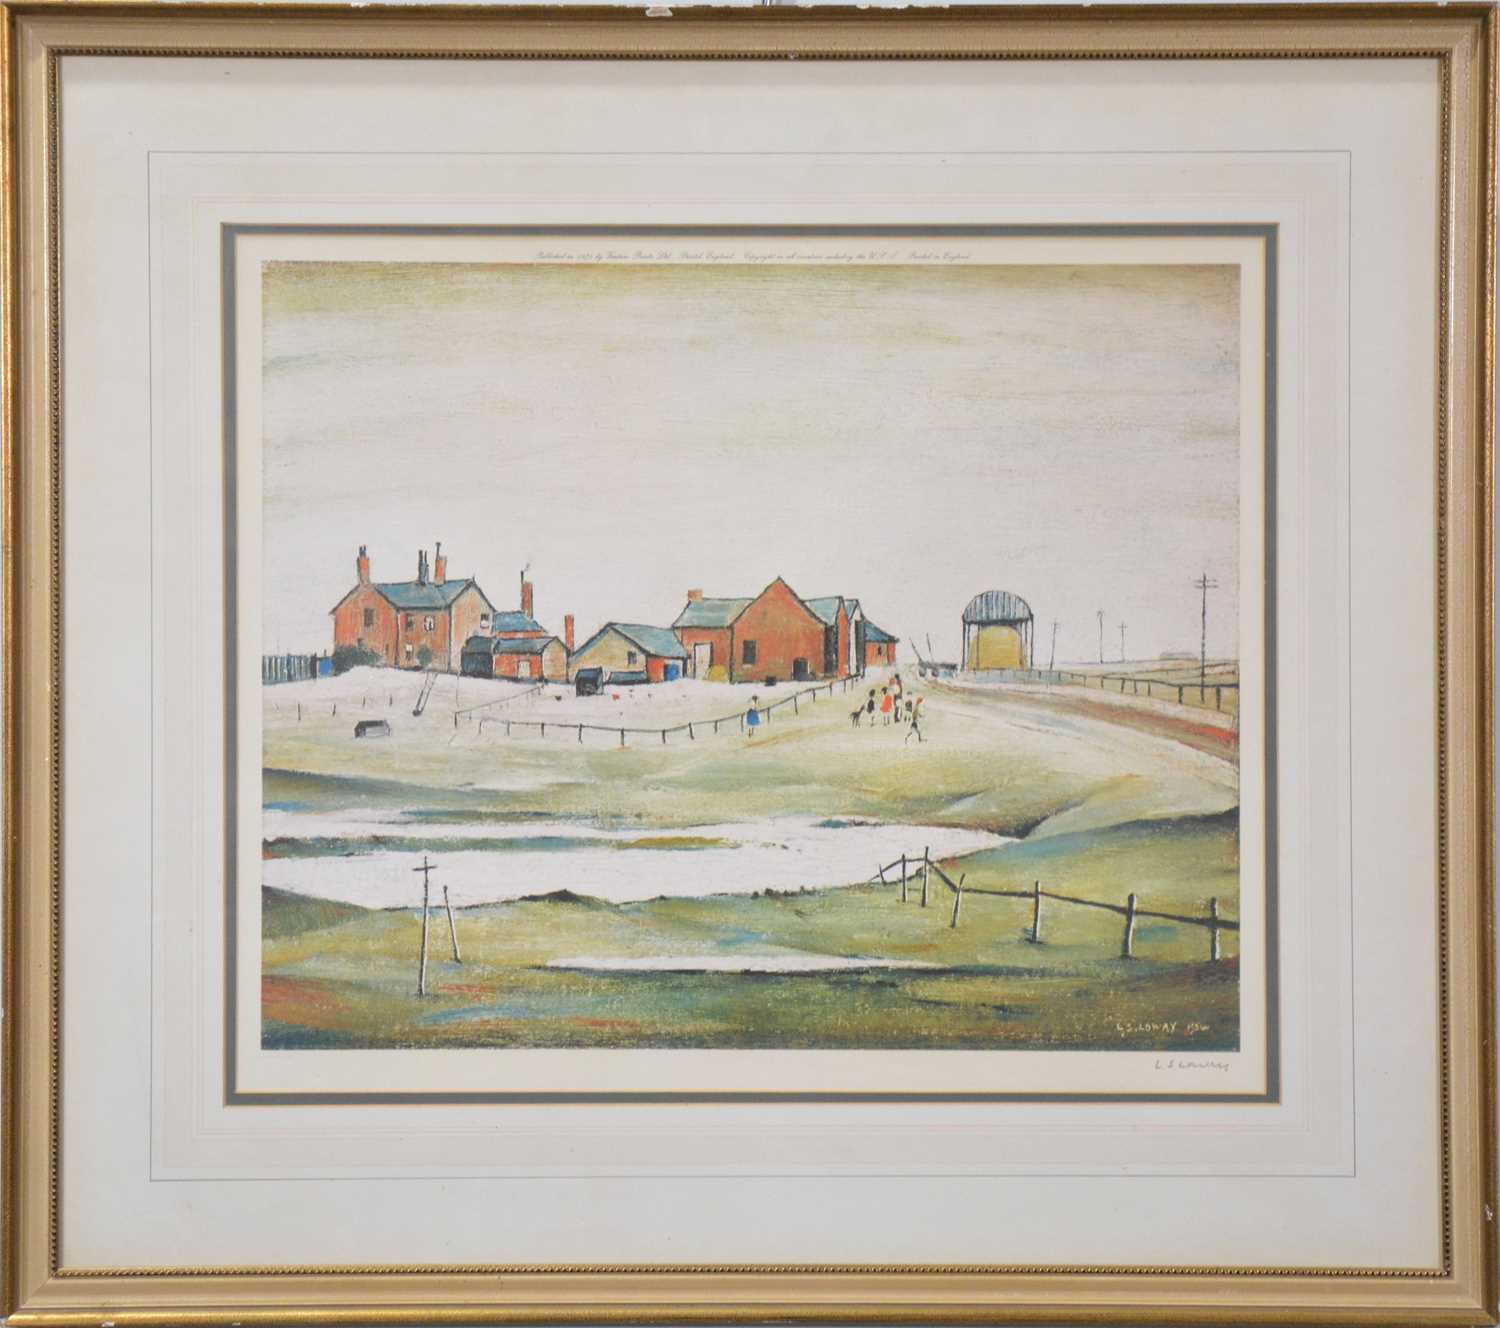 § After Laurence Stephen Lowry, Landscape with Farm Buildings 1954 - Image 2 of 2